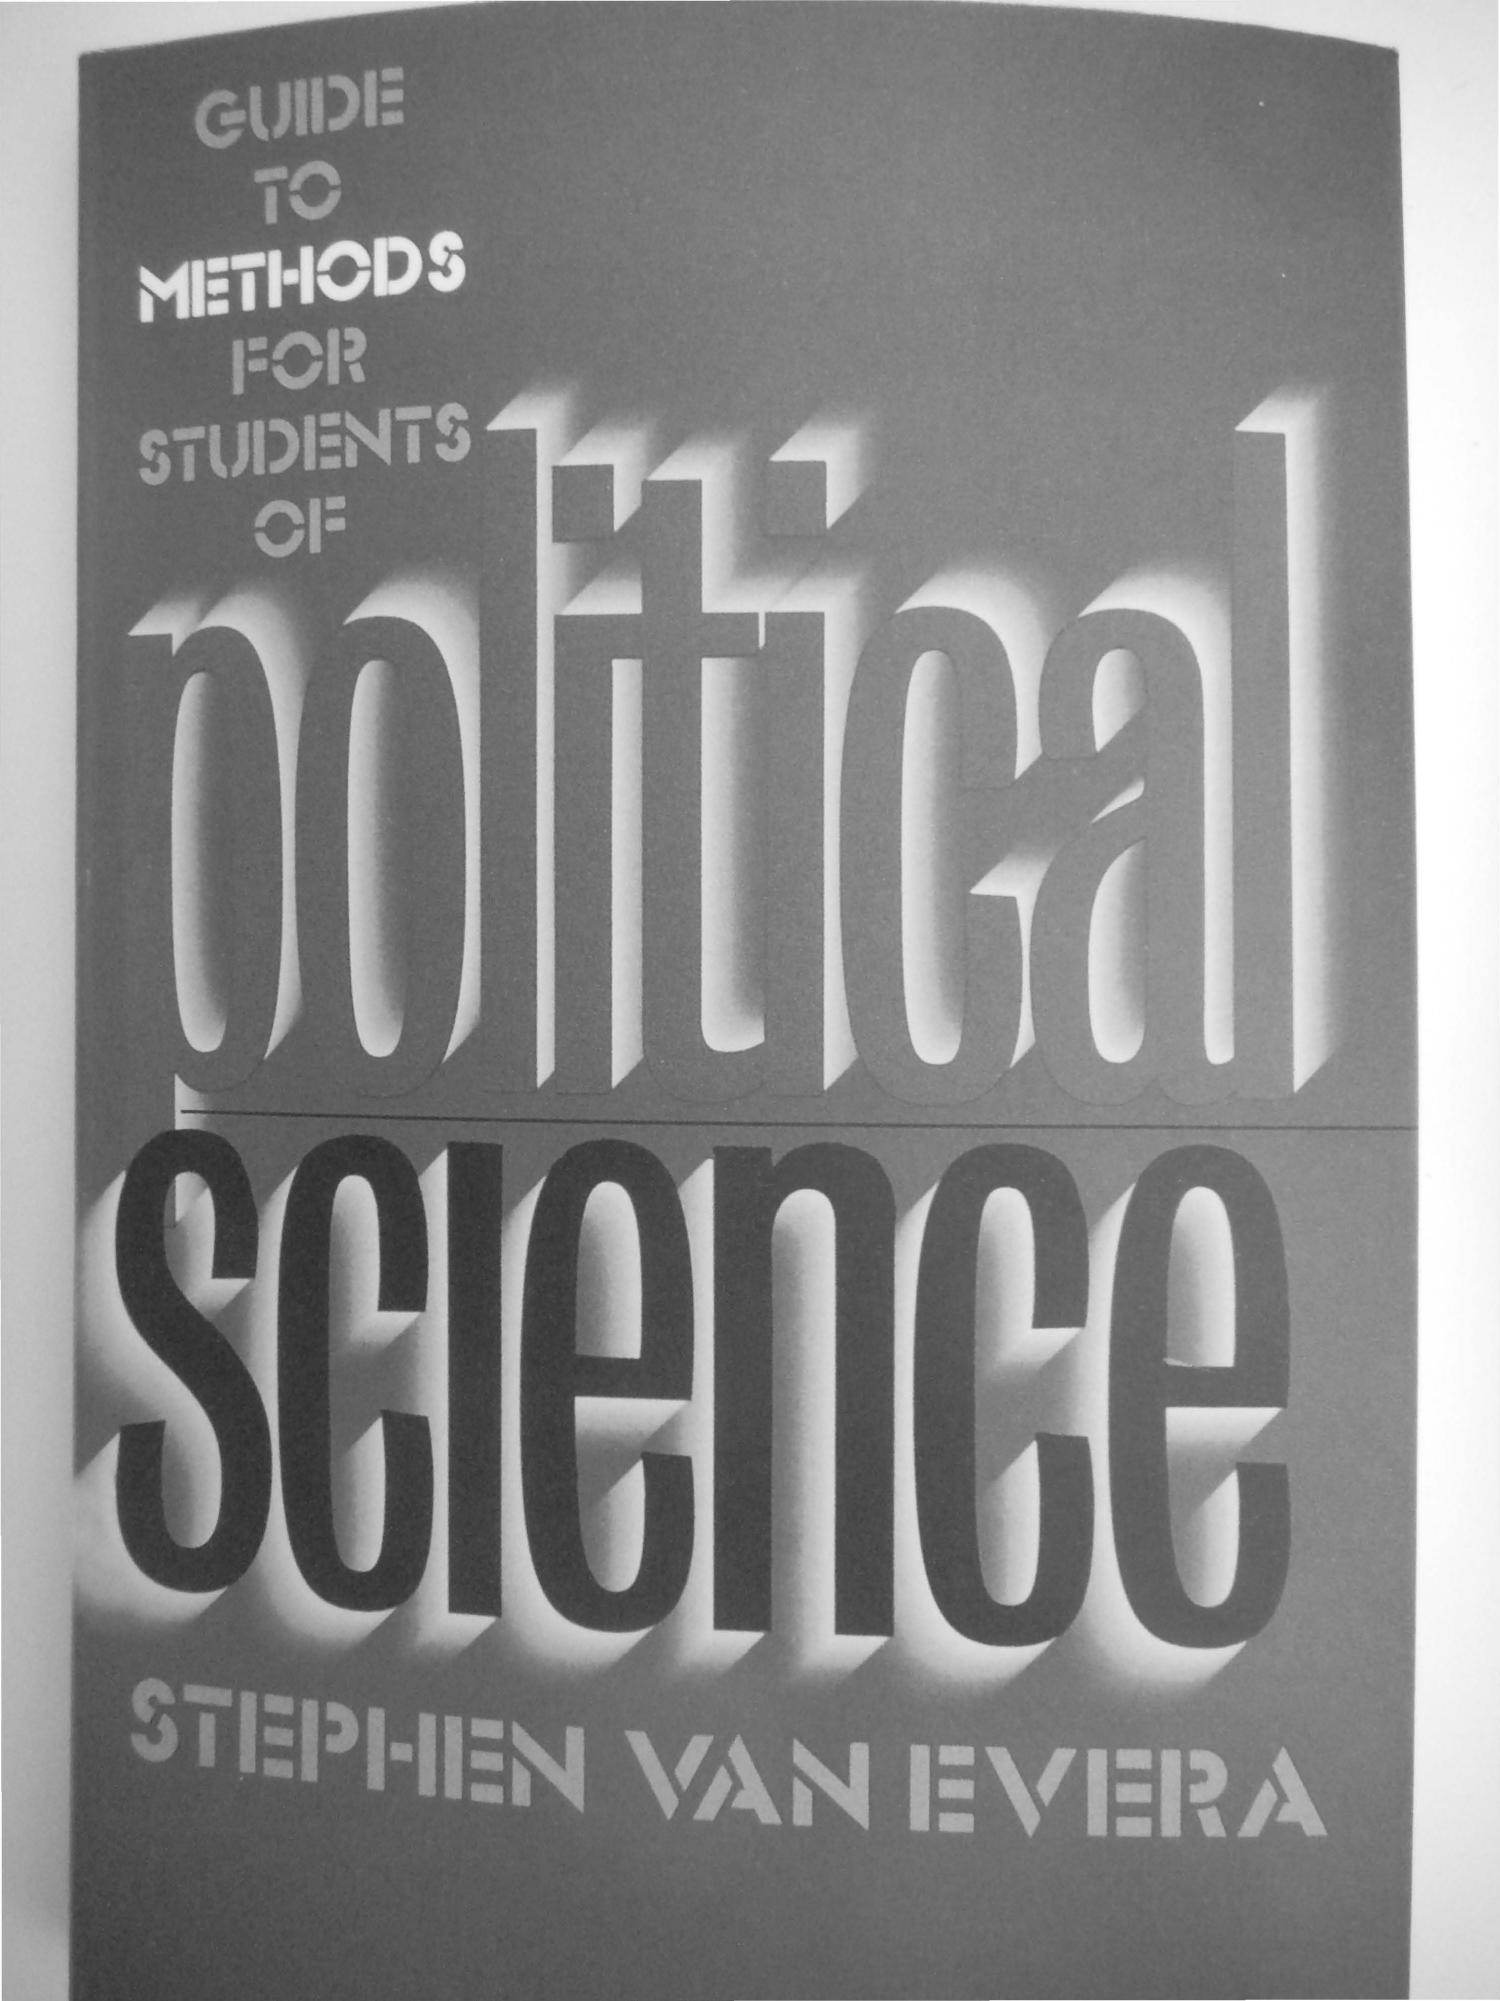 Guide to methods for students of political science ( PDFDrive )